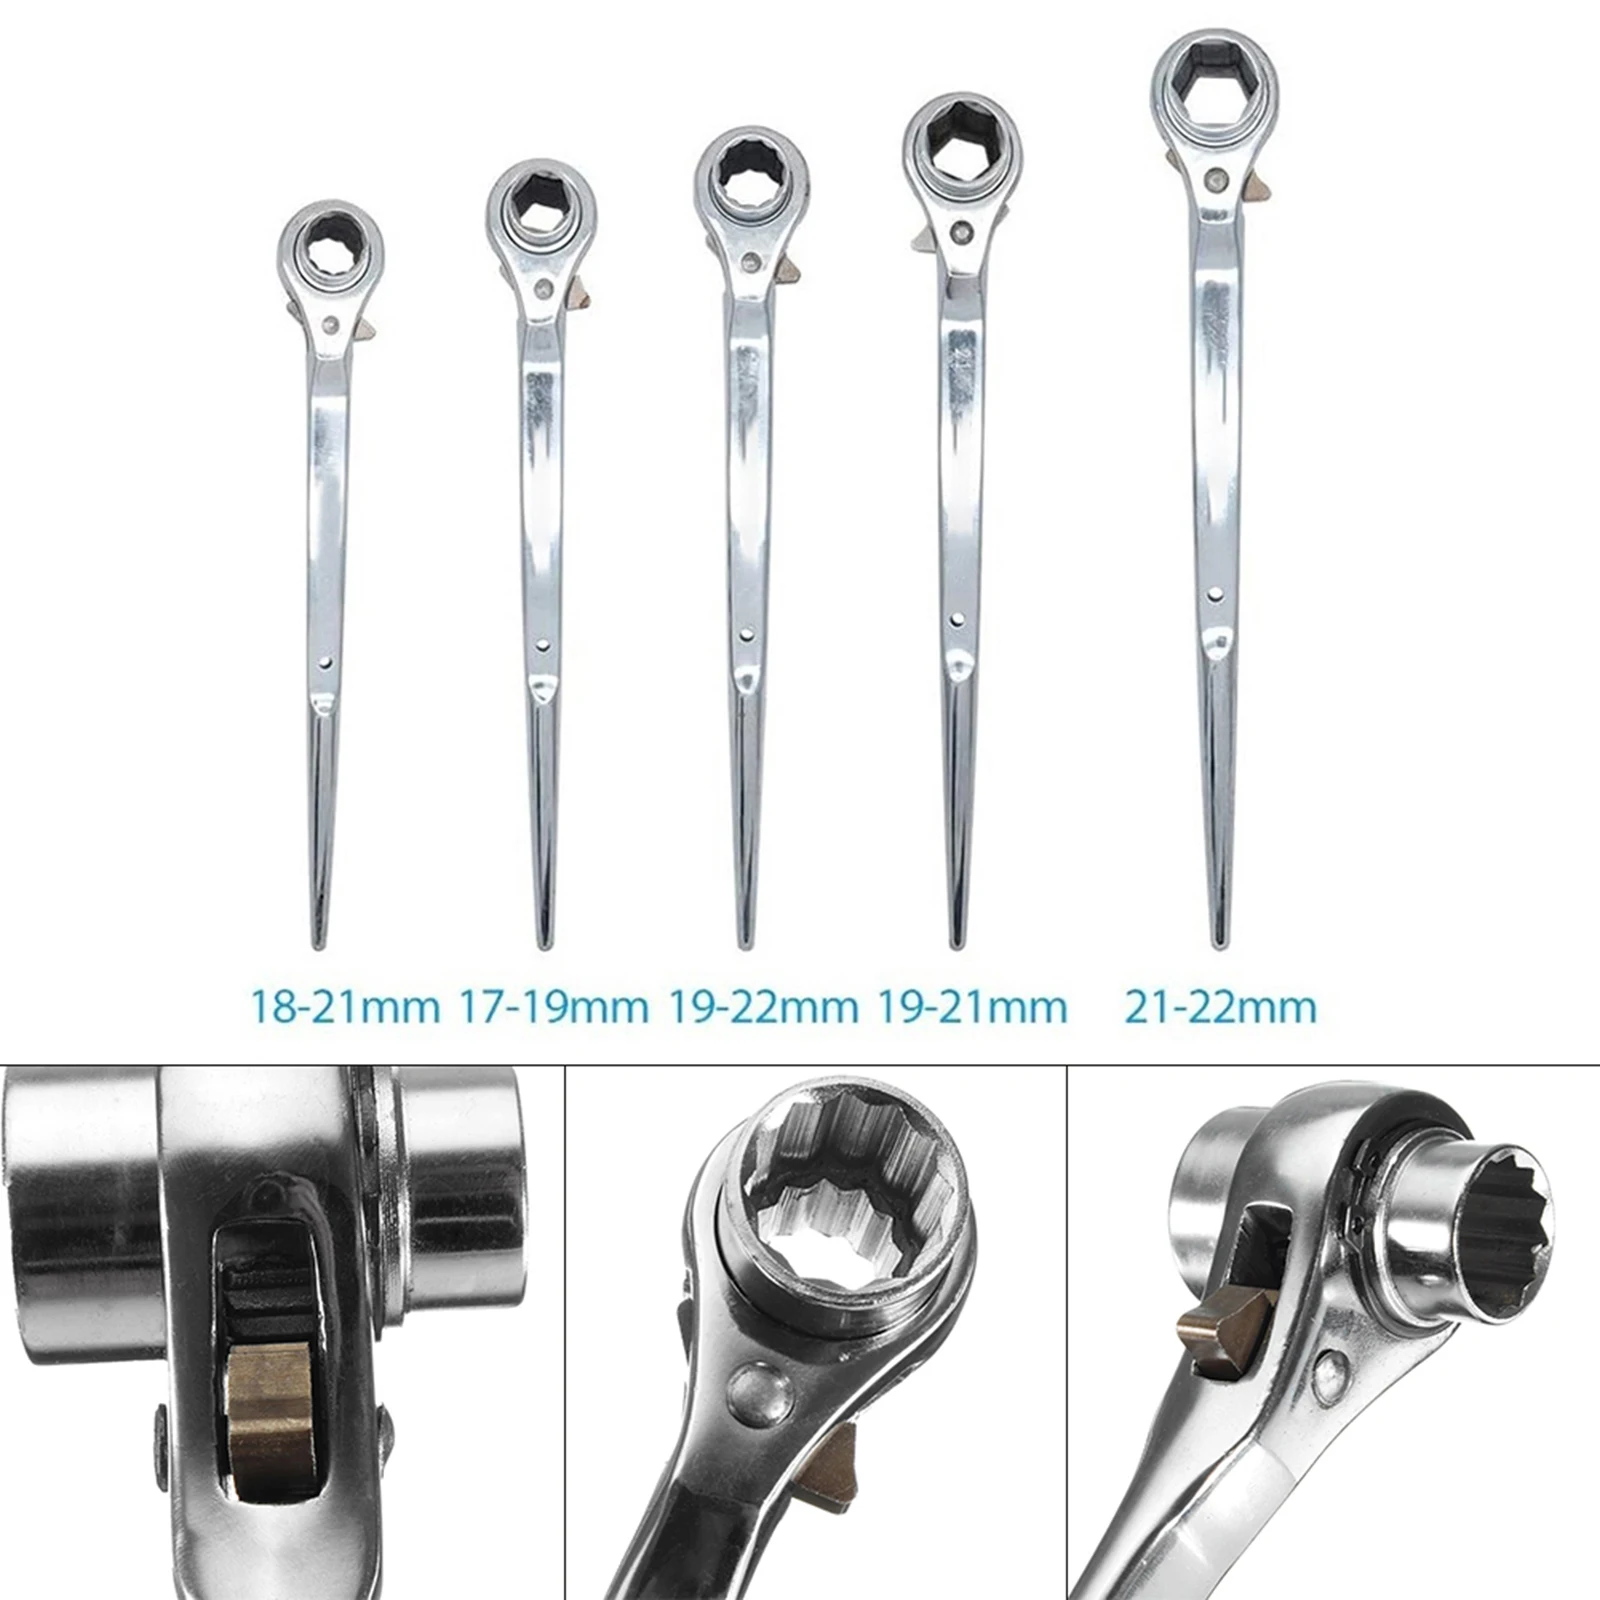 

1PC 17-22mm Ratchet Wrench Universal Head End Socket Wrench Podger Spanner Double-headed Ratchet Socket Wrench Hand Tools